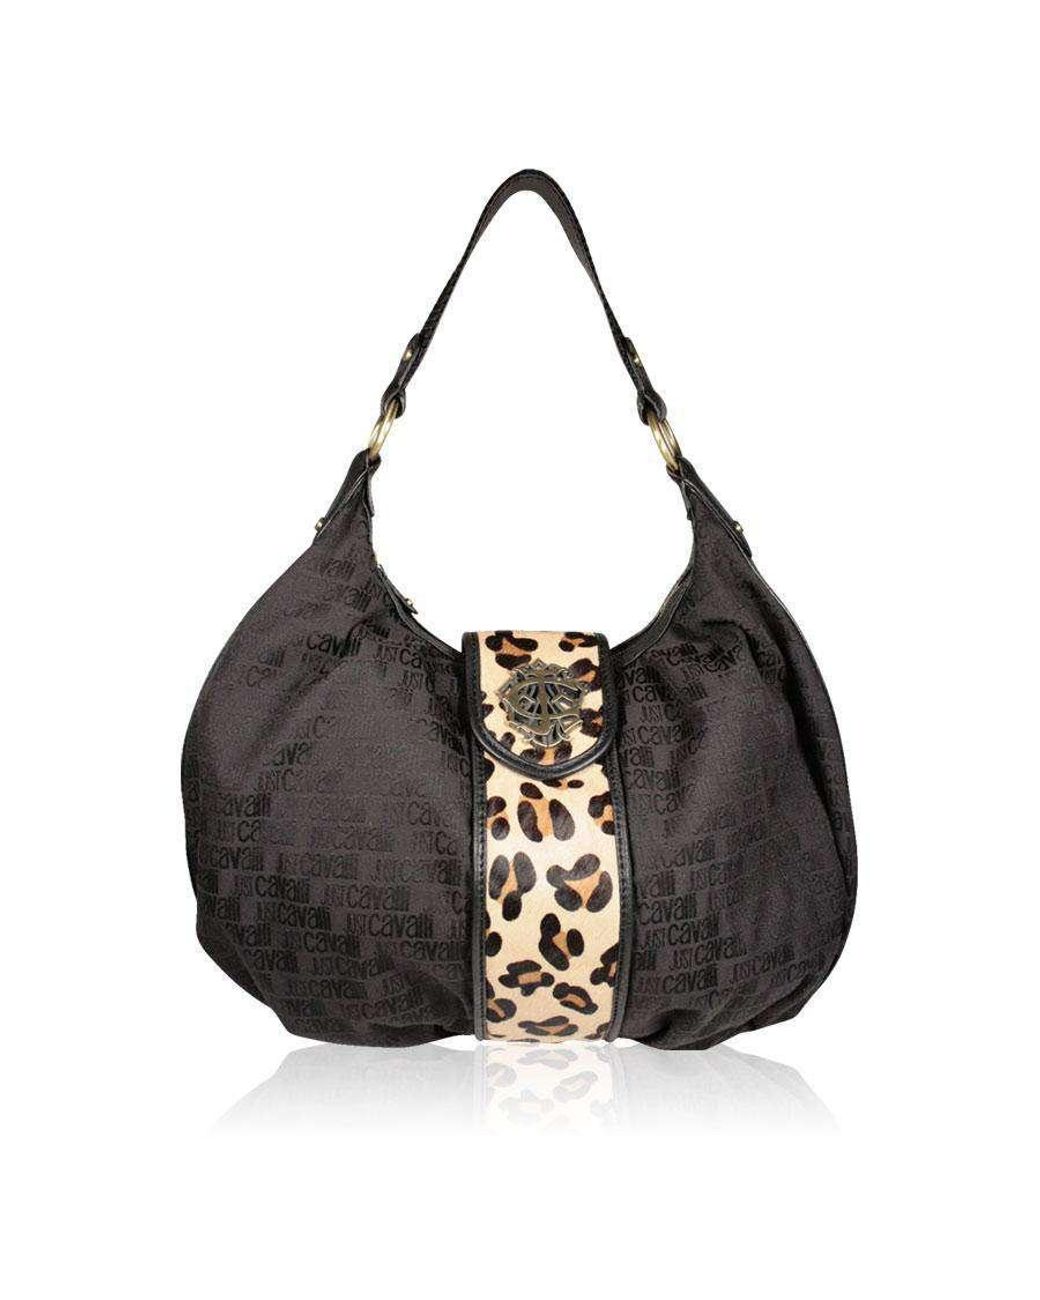 Womens Bags Hobo bags and purses in Brown Just Cavalli Handbag Mauve Leather Slouchy Hobo Bag W/side Pockets jc168 